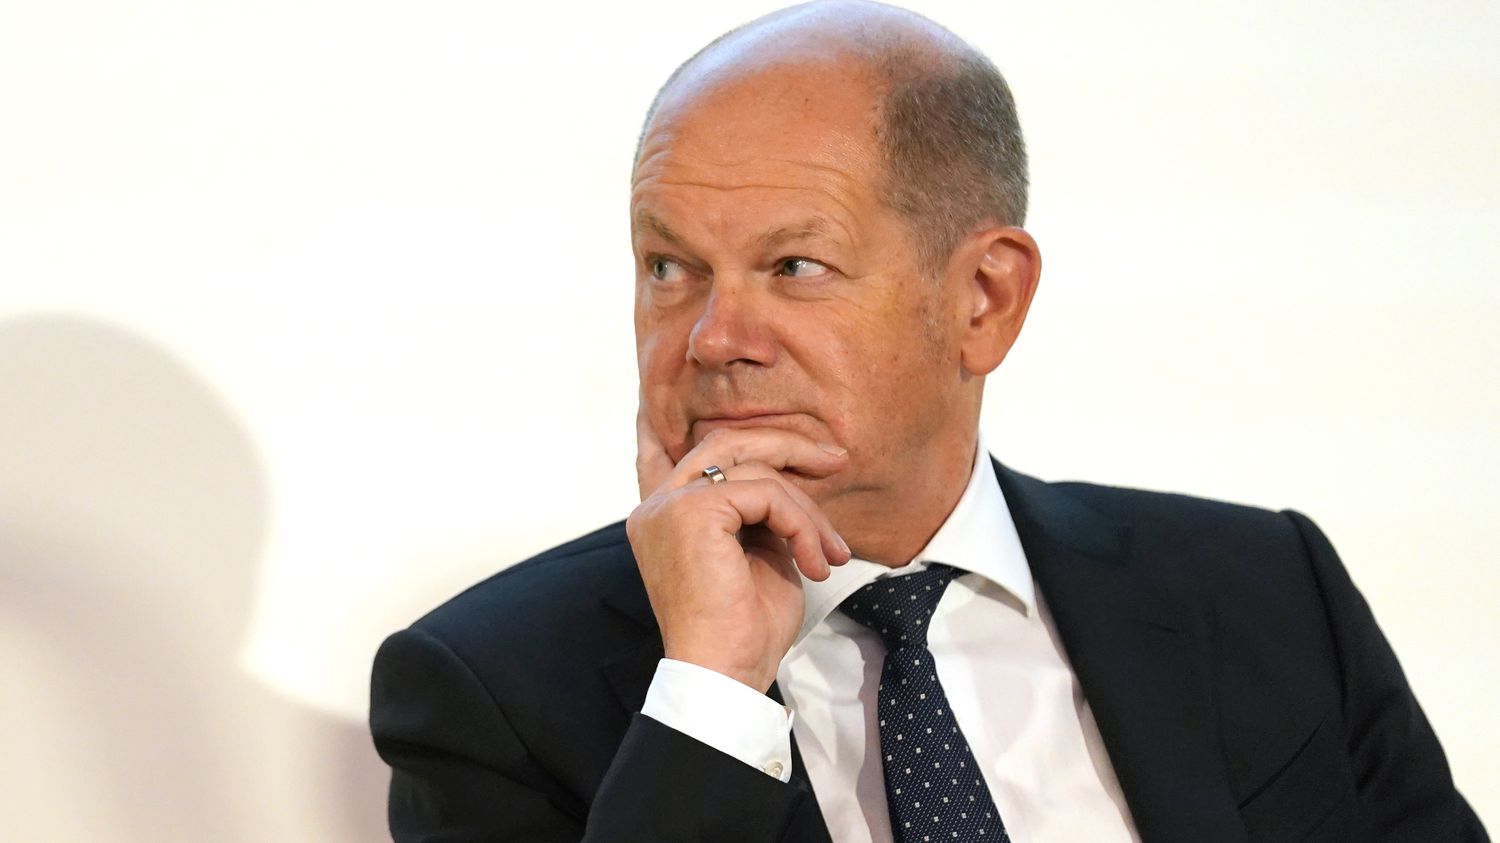 Germany: Chancellor Olaf Scholz tested positive for Covid-19
